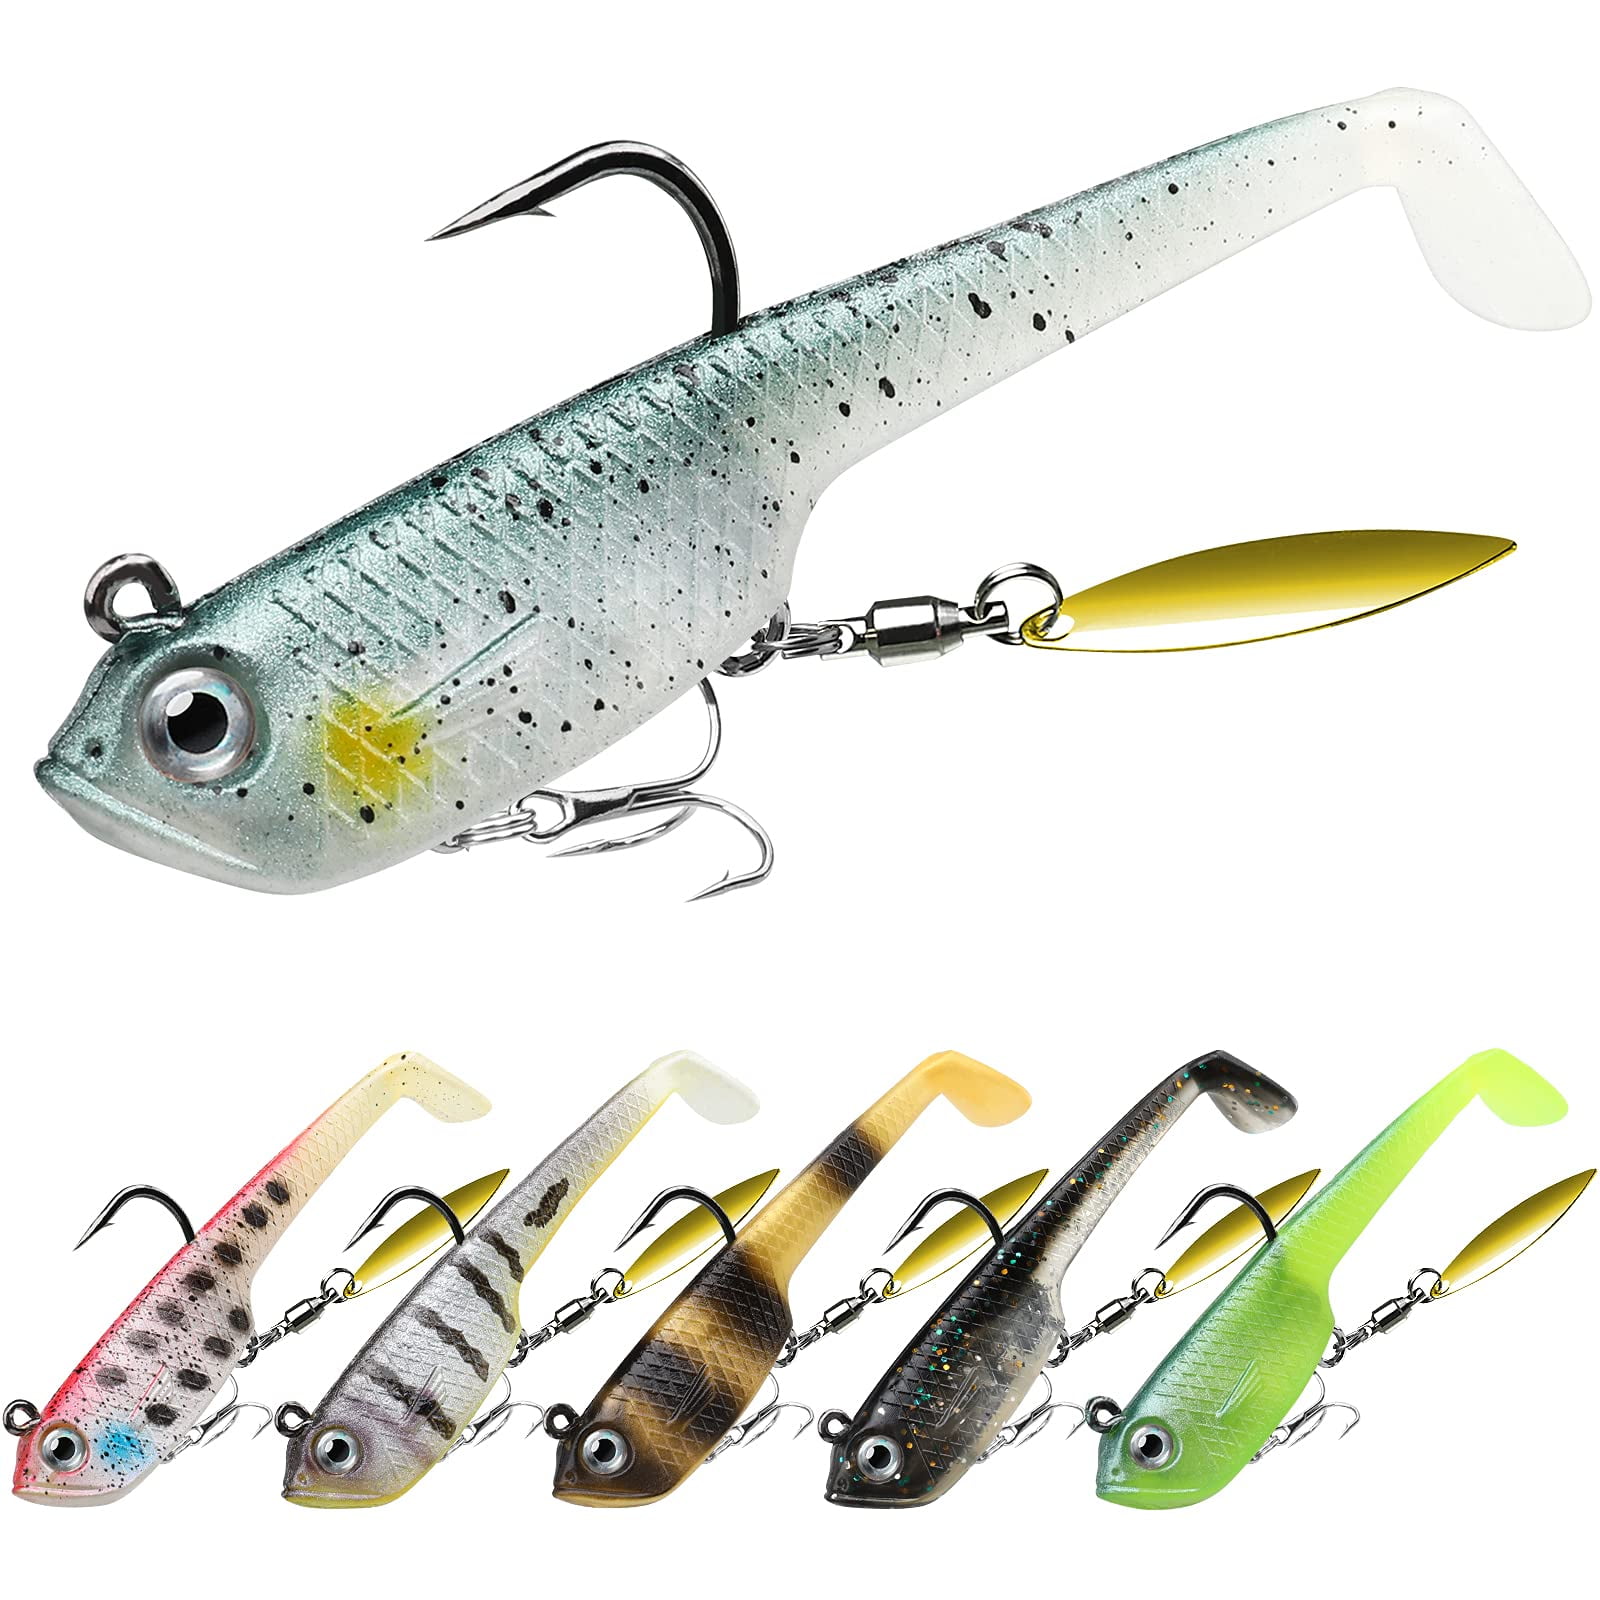 Fishing 10pcs/Lot Pre-Rigged Paddle And Curly Tail Swimbaits For Bass  Fishing Shad Or Tadpole Lure Soft Fishing Lures